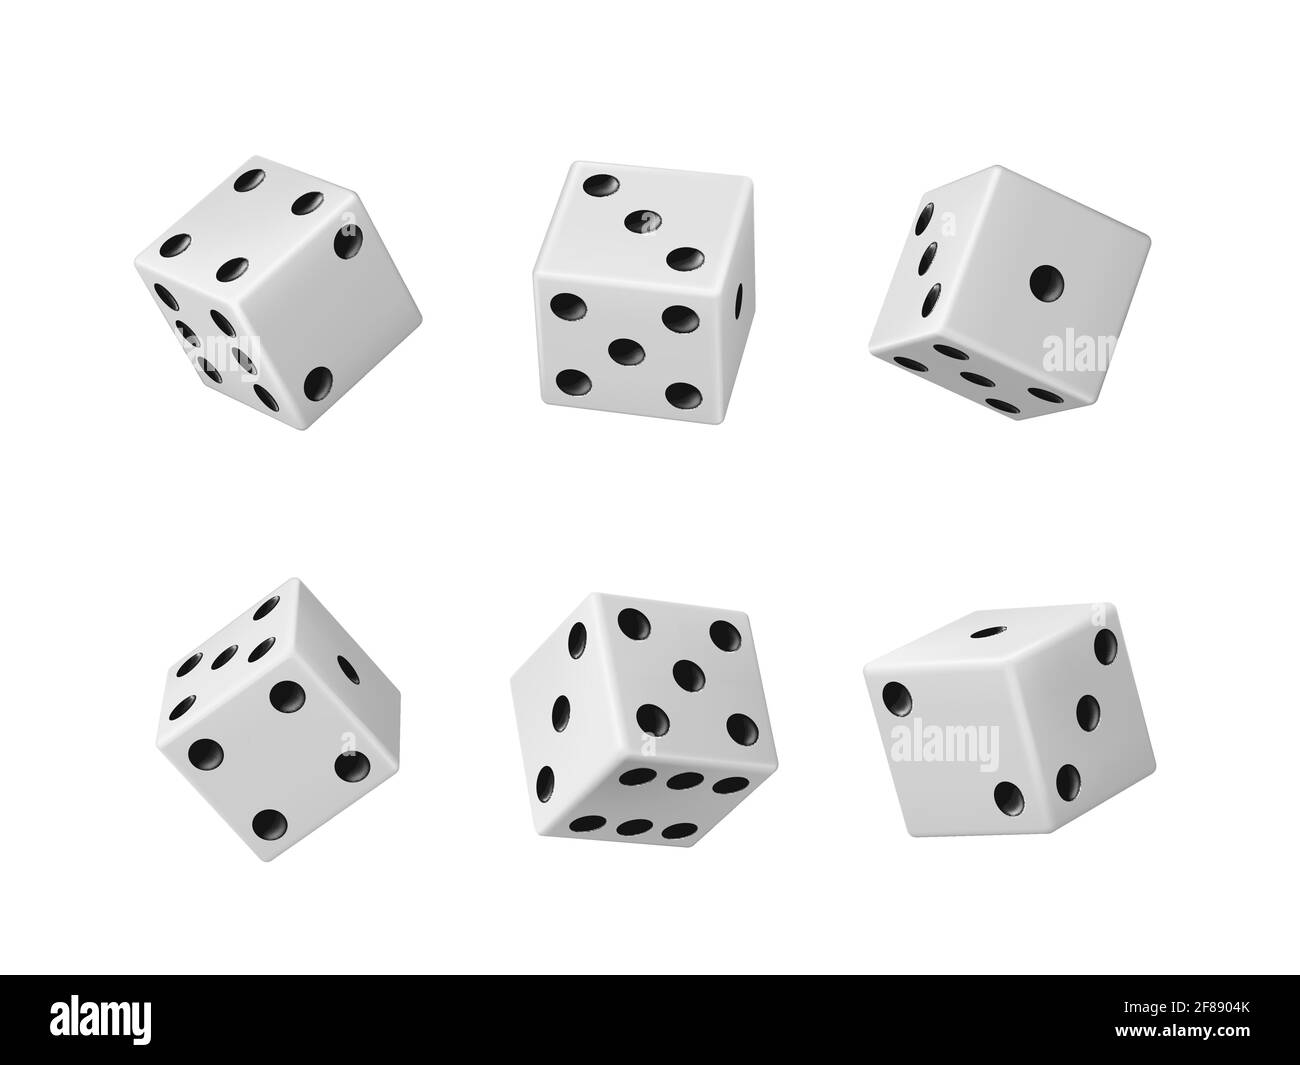 Gambling game dice realistic vector set of casino craps, poker and tabletop board games Isolated white play dice cubes with black dots or pips in diff Stock Vector